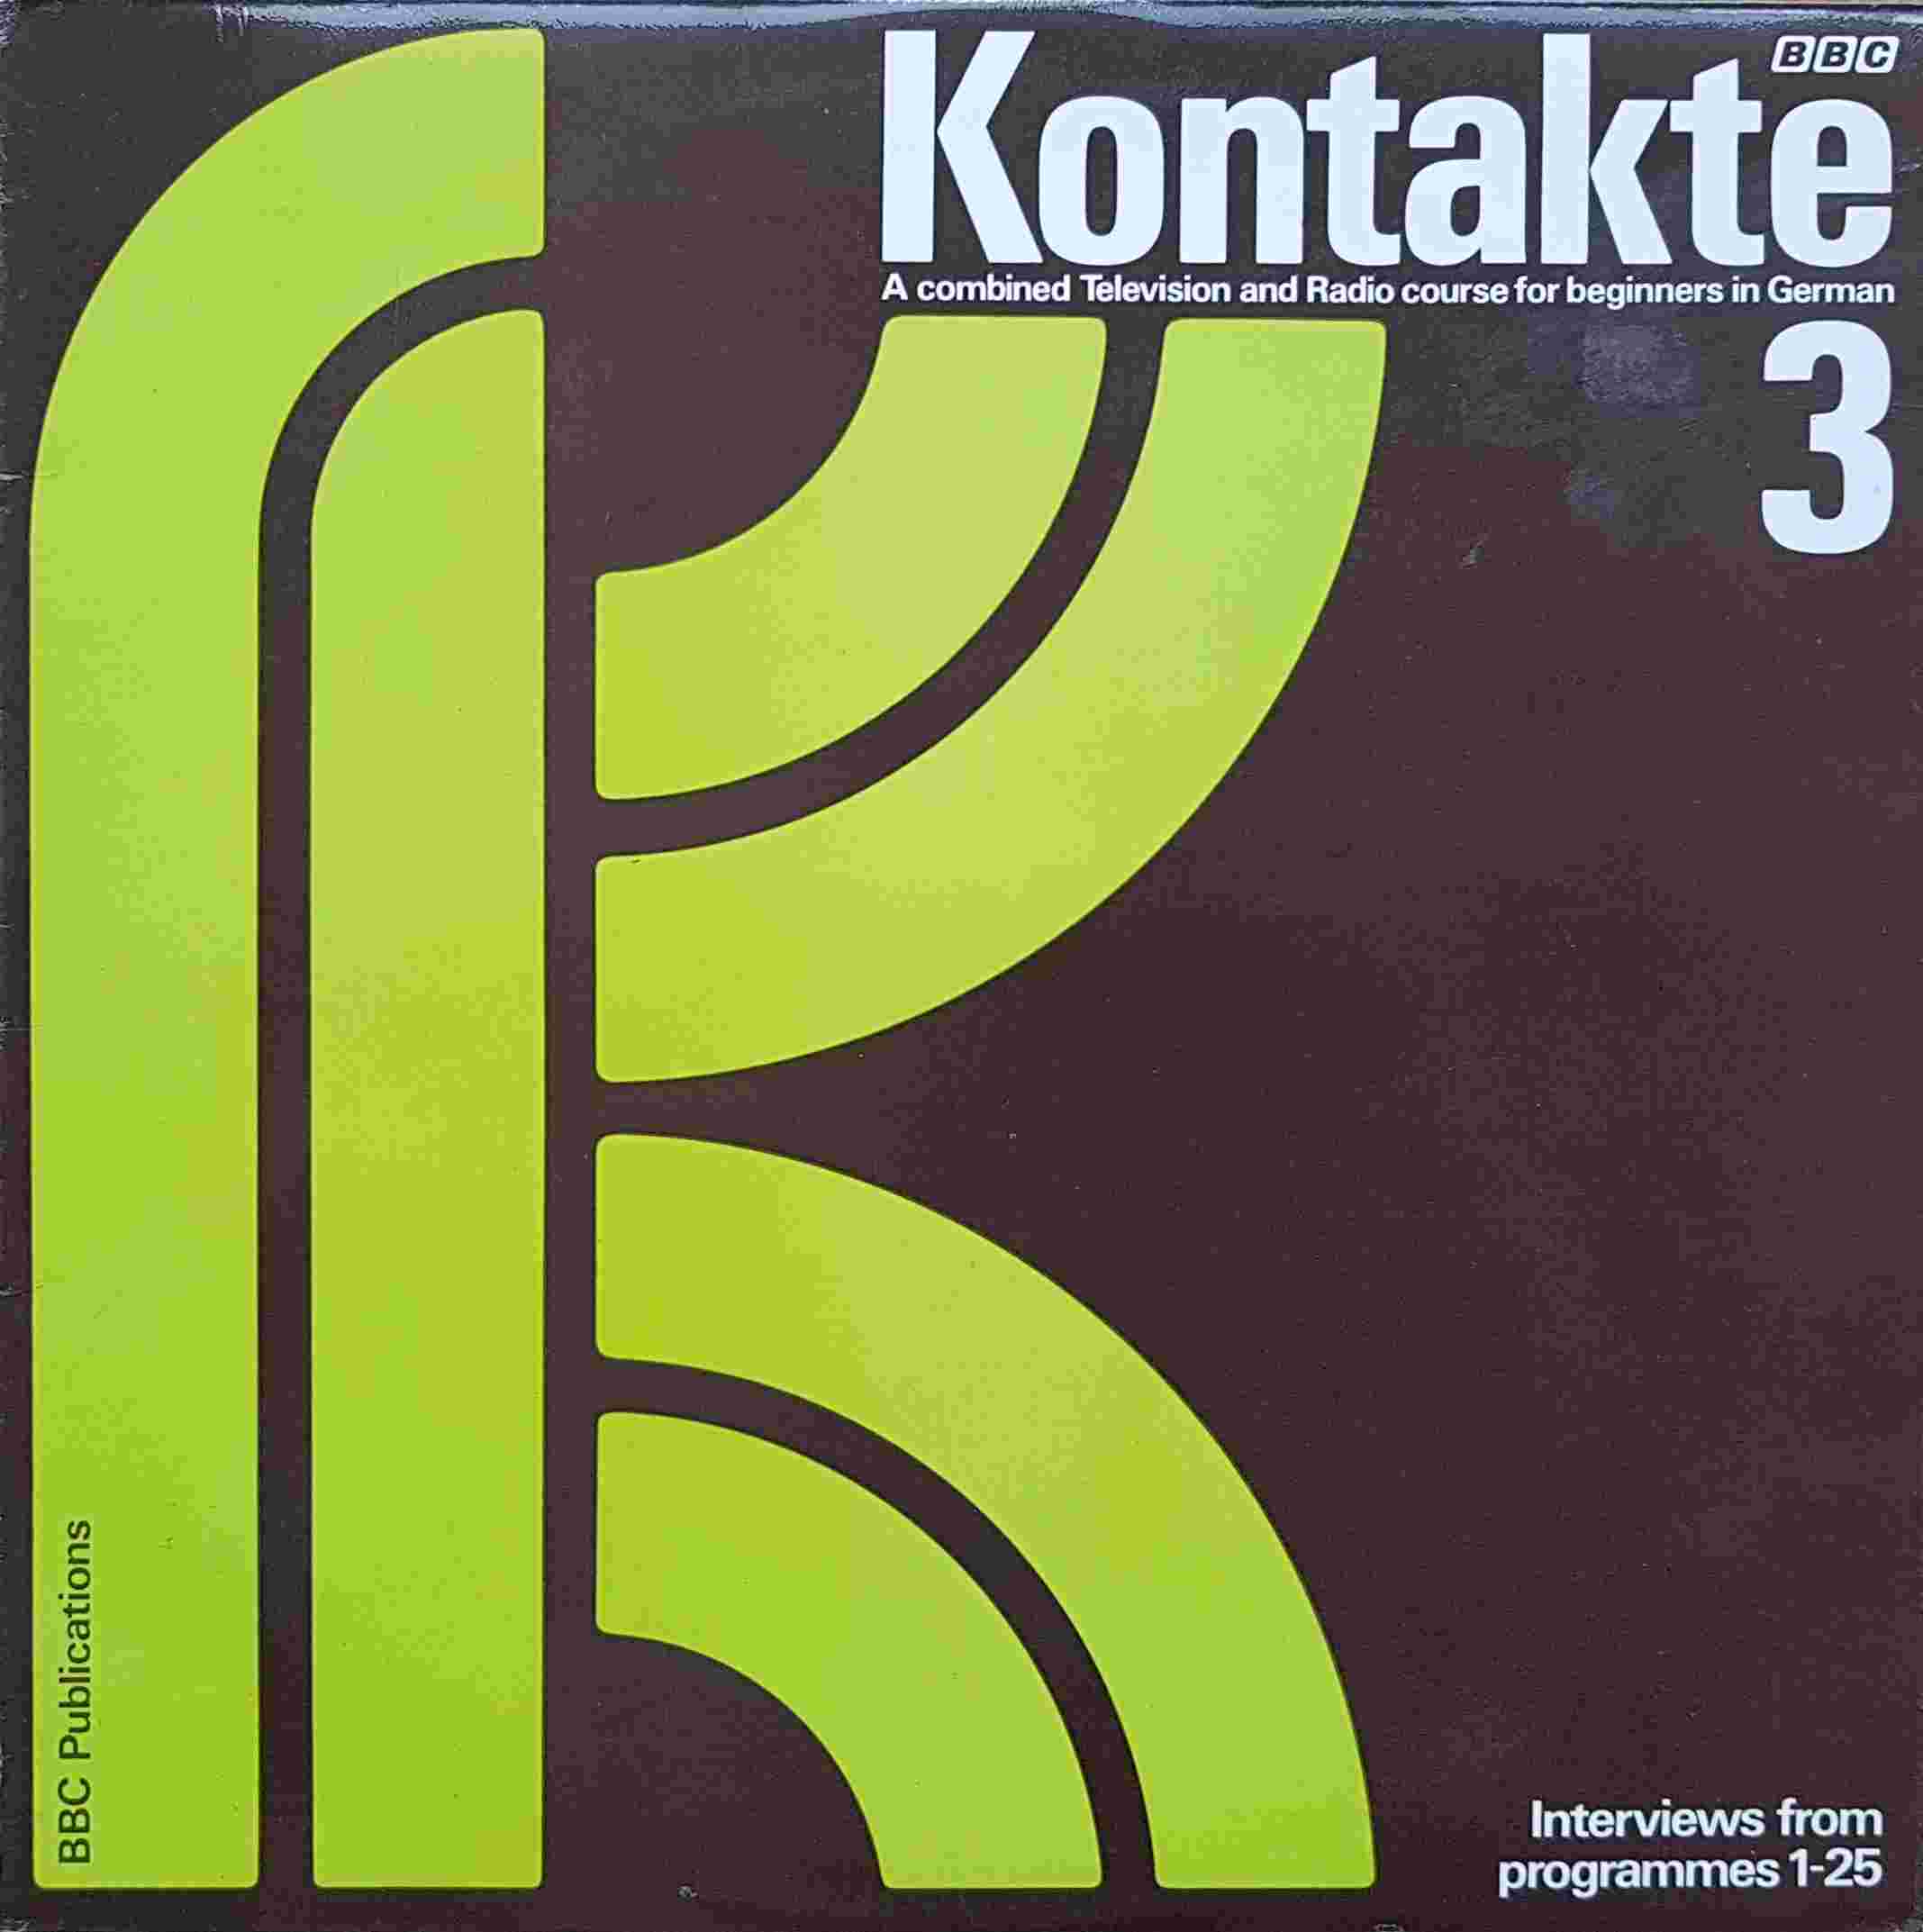 Picture of OP 215 Kontakte - A combined Television and Radio course for beginners in German - Record 3 - Interviews from programmes 1 - 25 by artist Corinna Schnabel / Antony Peck from the BBC albums - Records and Tapes library